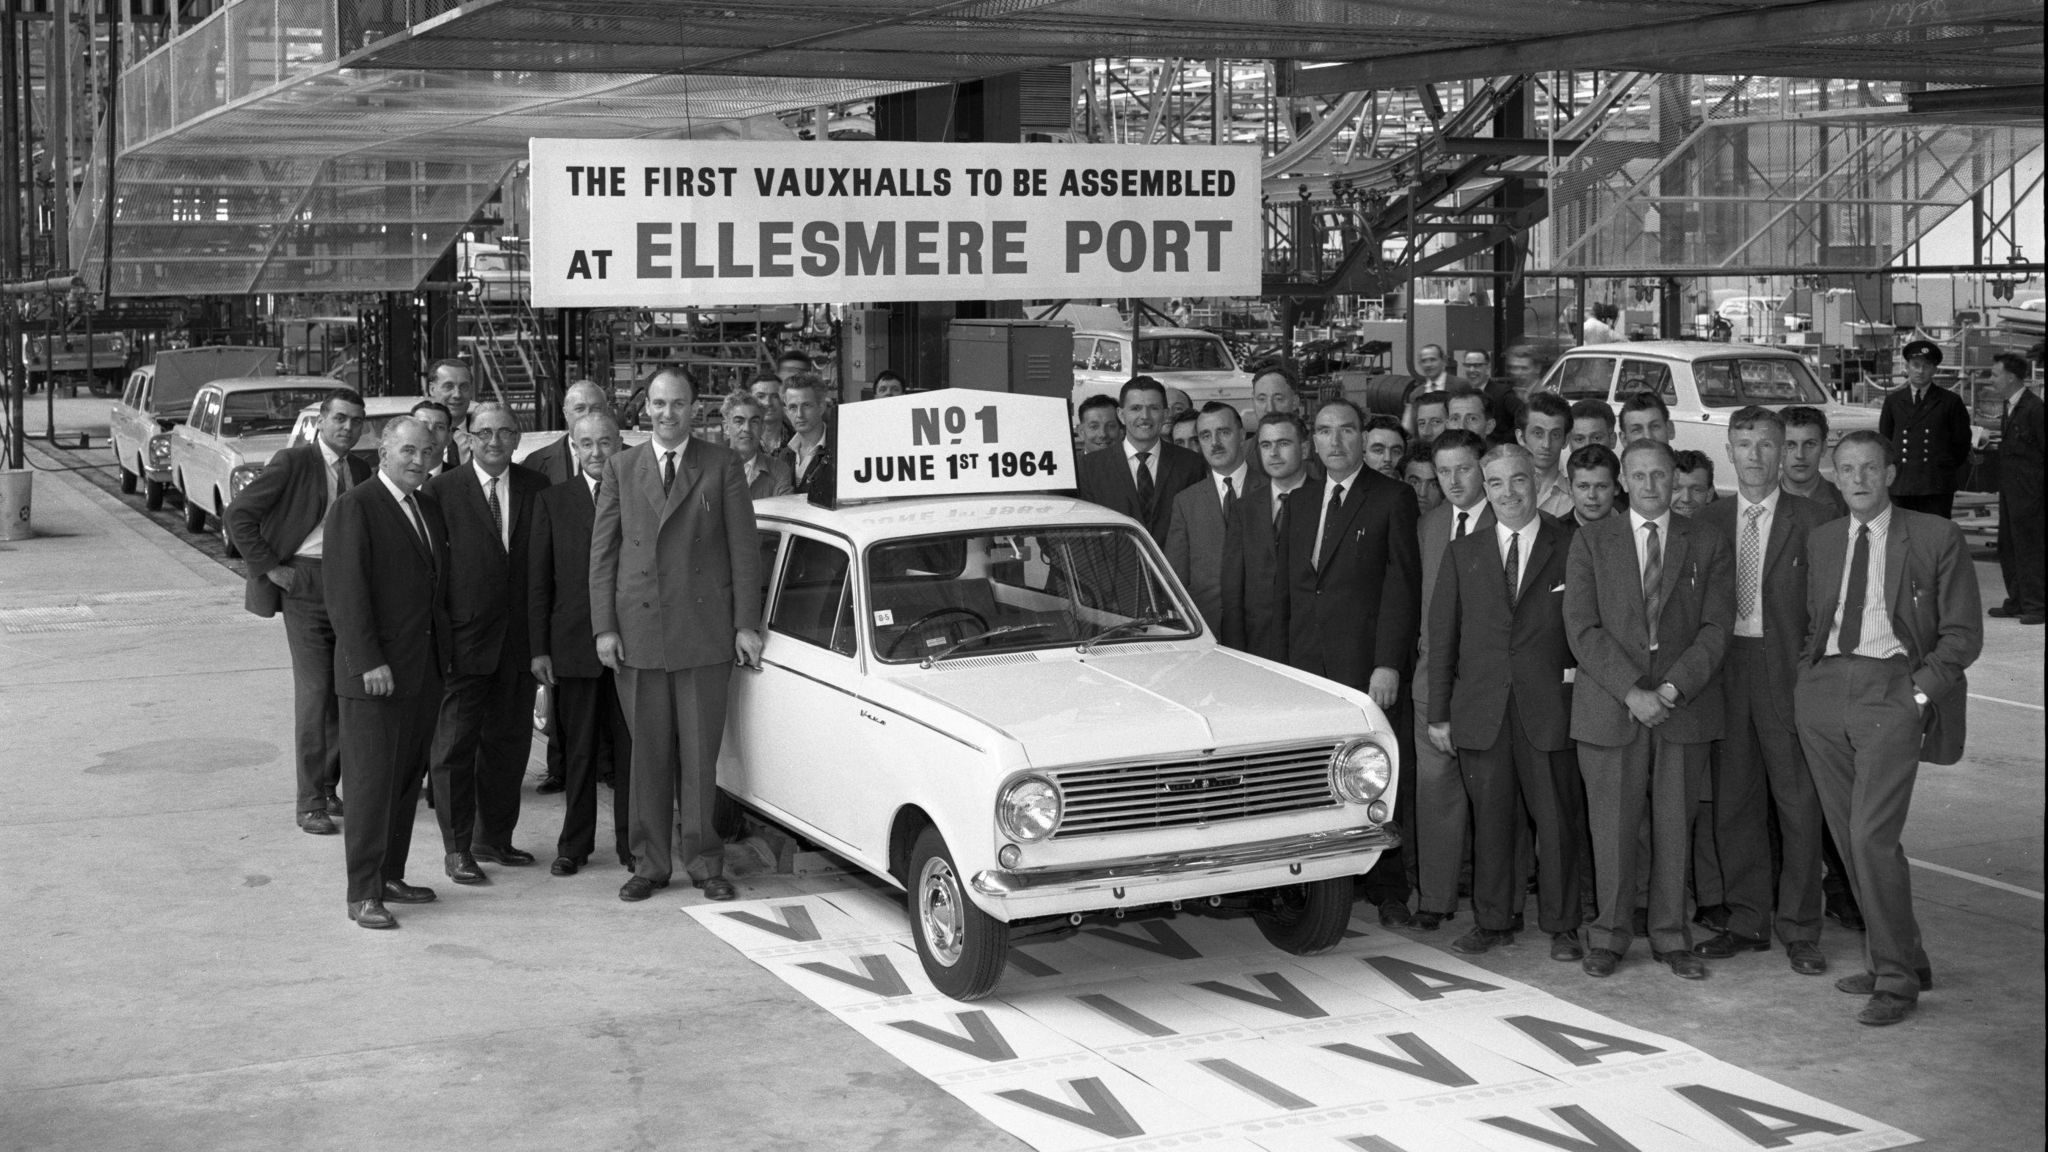 Staff pictured in 1964 standing next to the Vauxhall Viva on the production line at the Ellesmere Port factory 